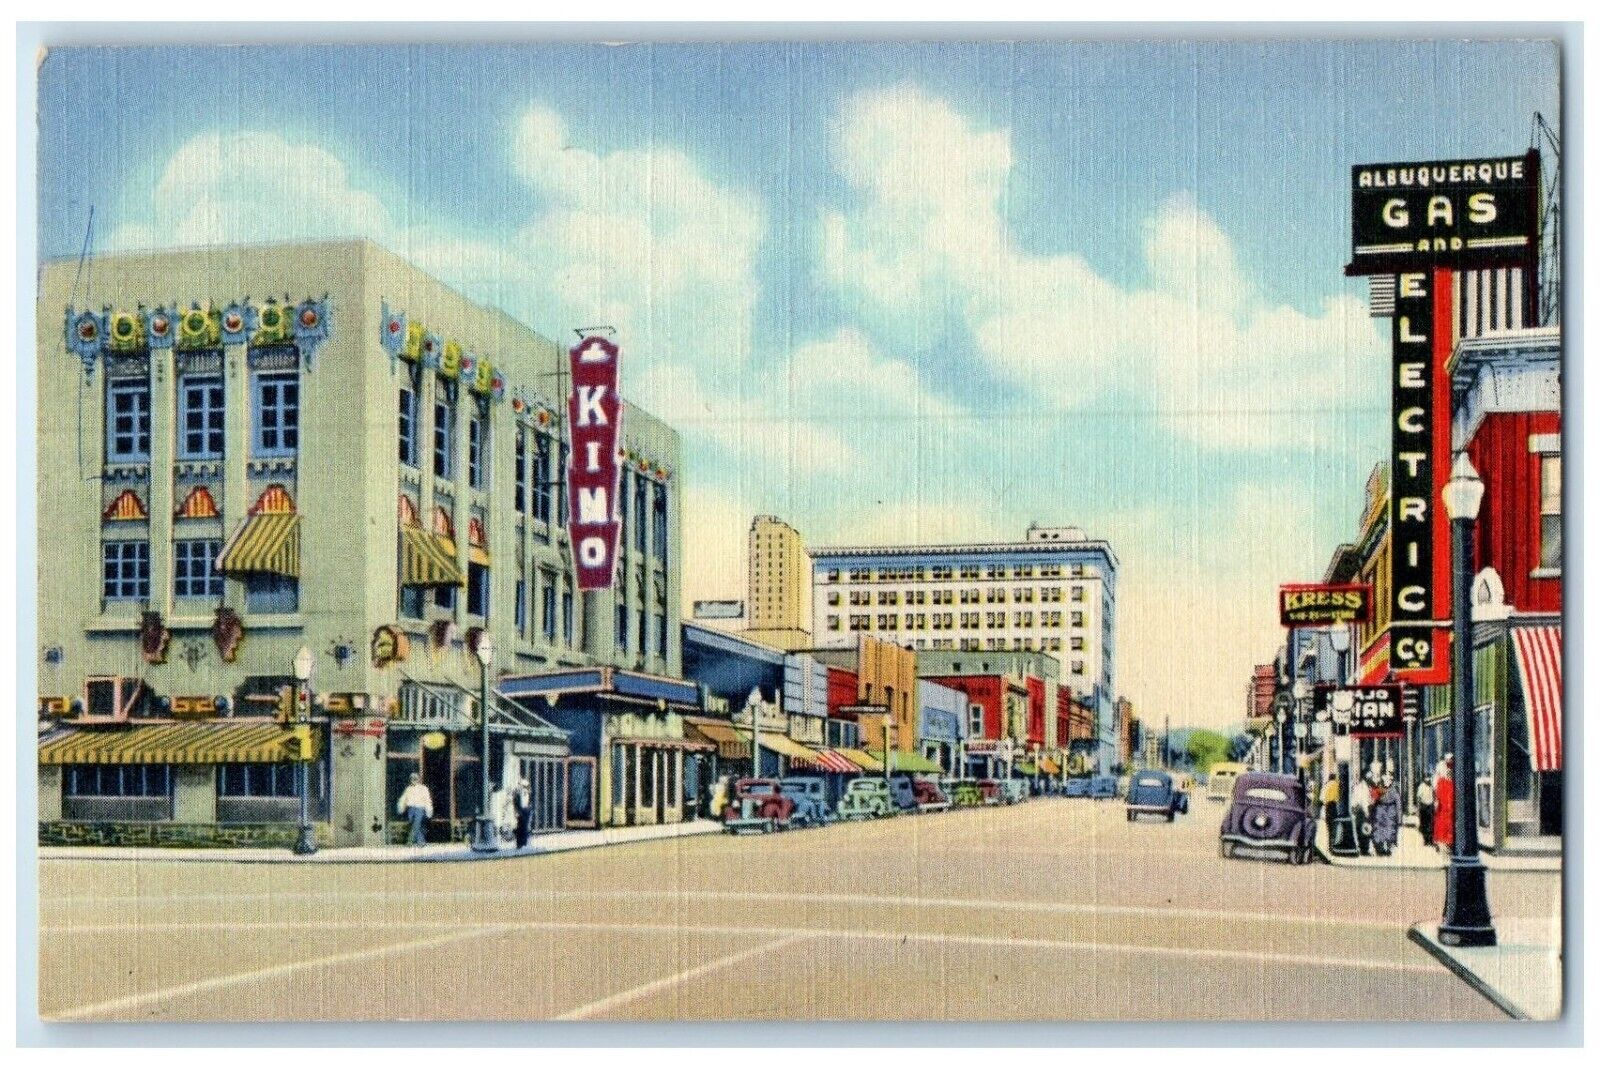 c1930s Central Ave. Looking East Kimo Gas Electric Kress Albuquerque NM Postcard